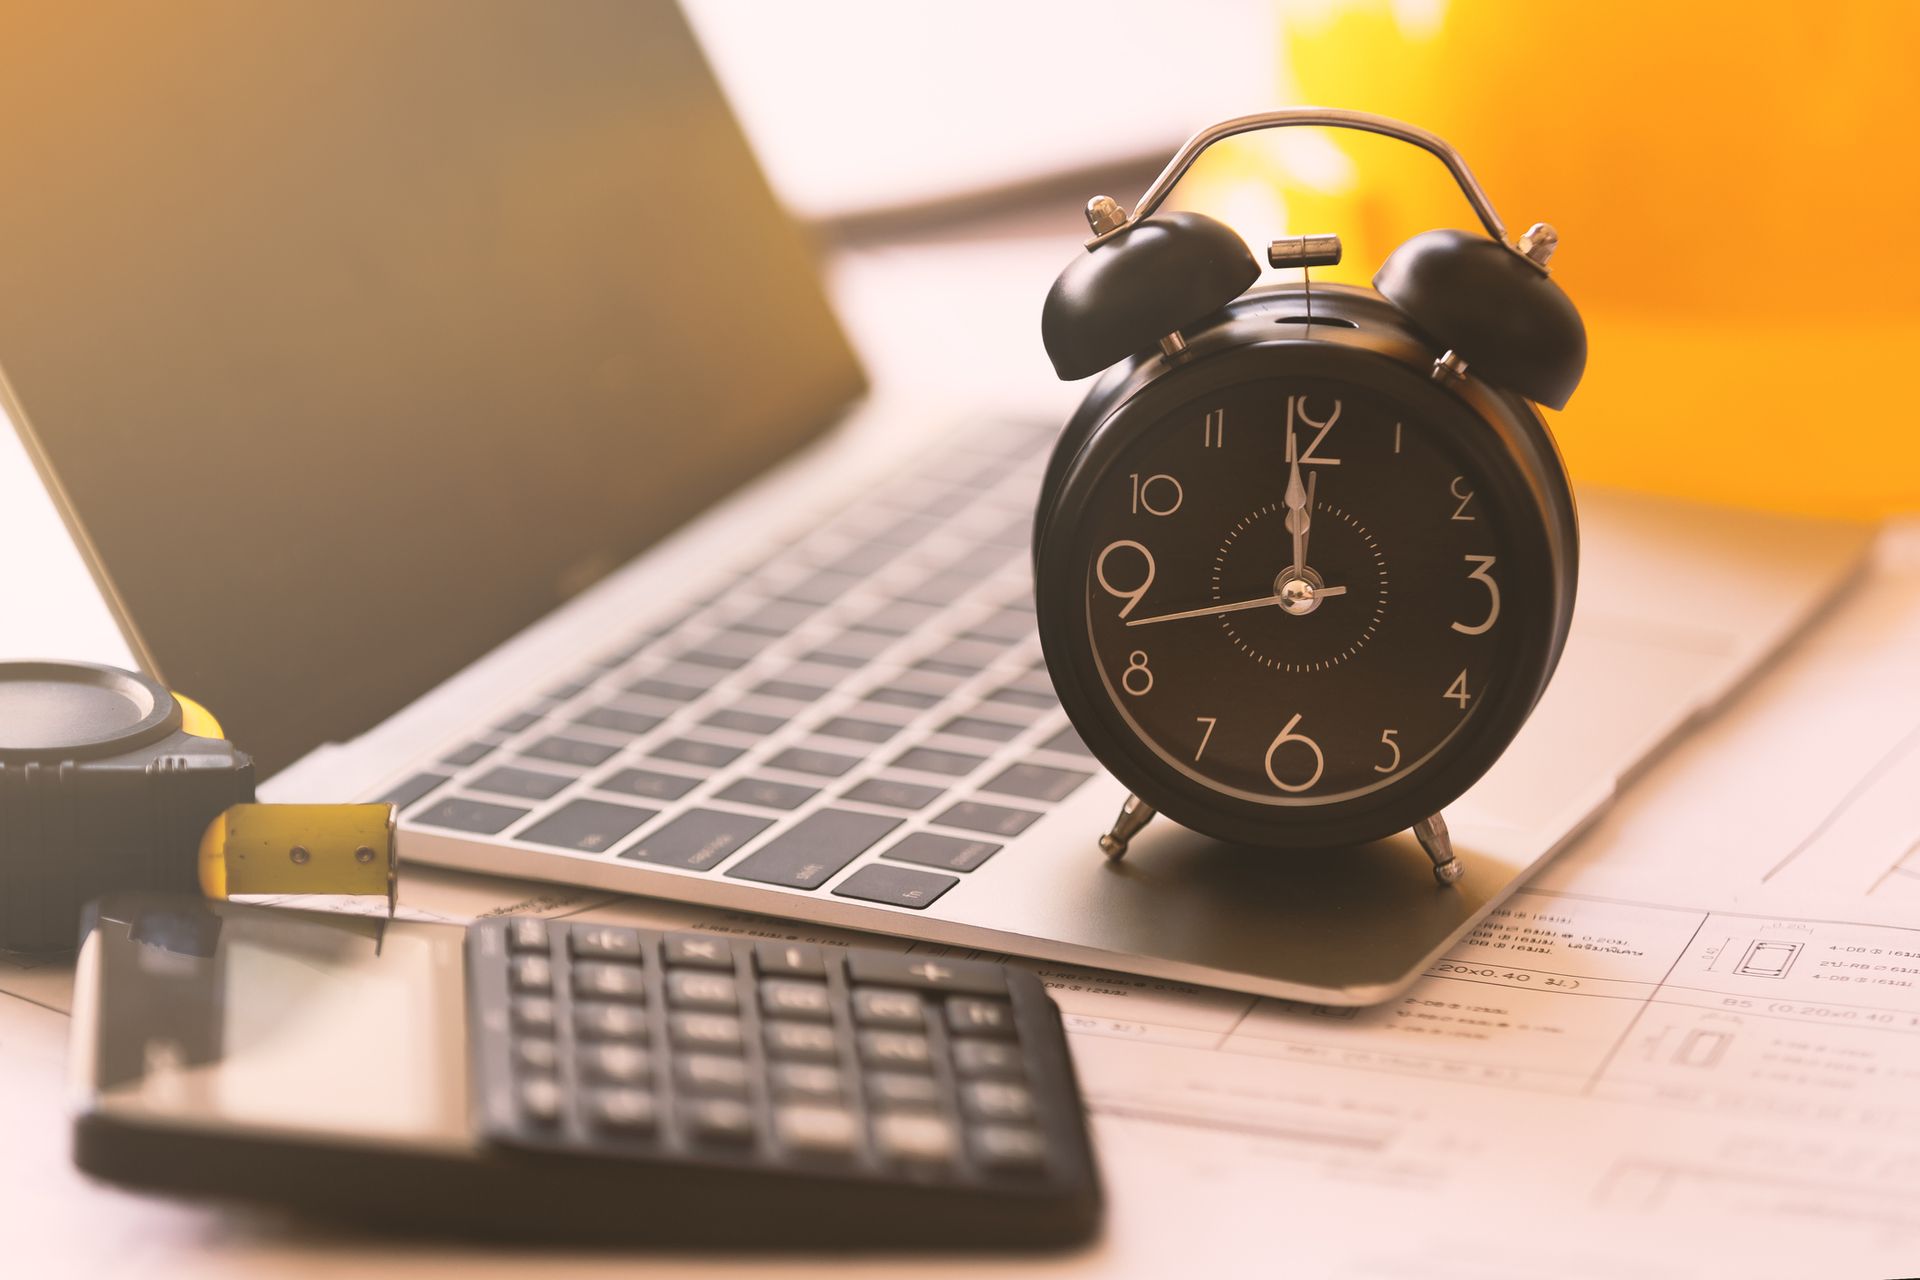 An alarm clock is sitting on top of a laptop next to a calculator.